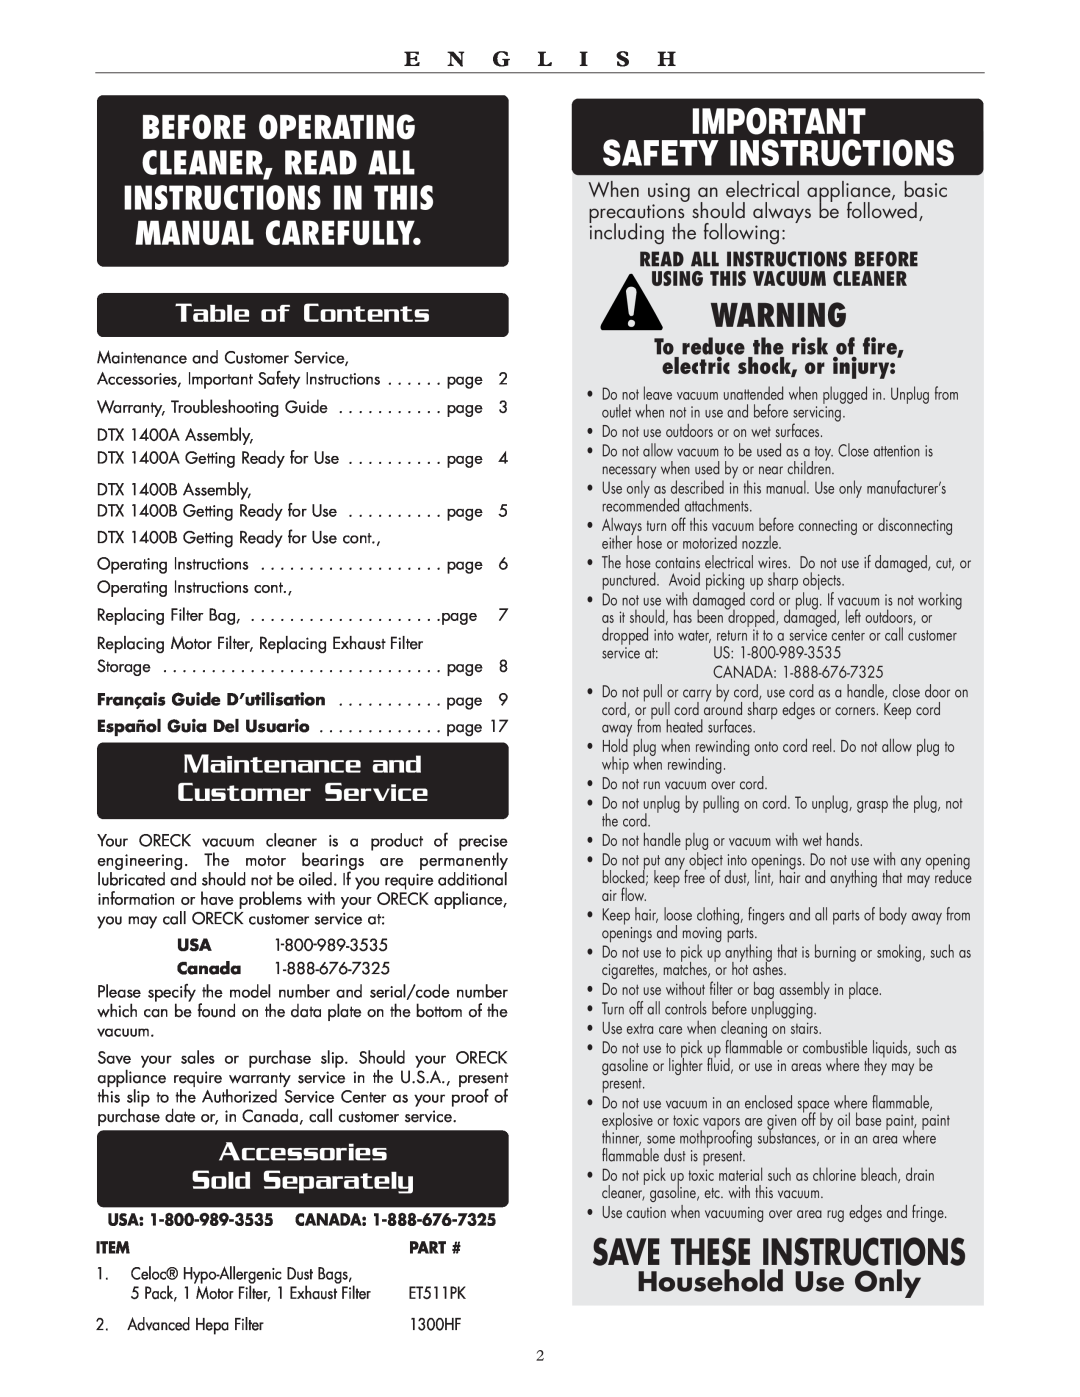 Oreck DTX Safety Instructions, Save These Instructions, Before Operating, Cleaner, Read All, Manual Carefully, Part # 